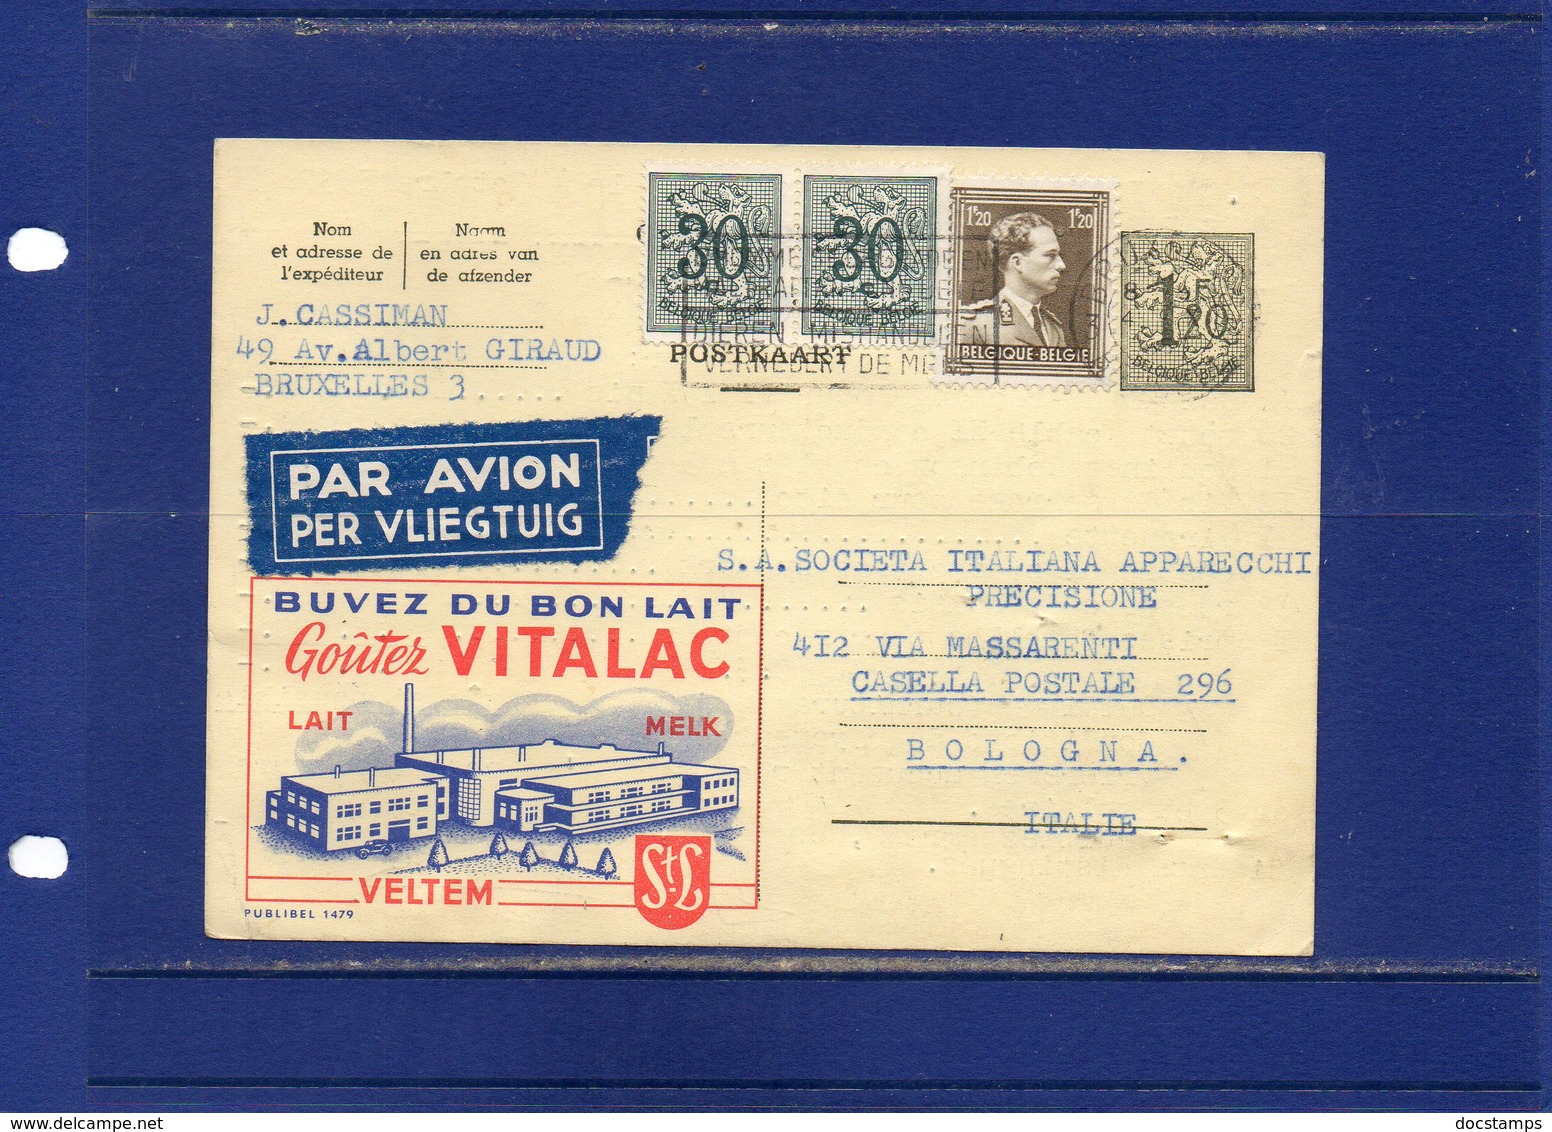 ##(DAN185)-1957- Belgium-advertising Postcard Vitalac Milk Sent By Air Mail From Bruxelles To Bologna (Italy) - Alimentation